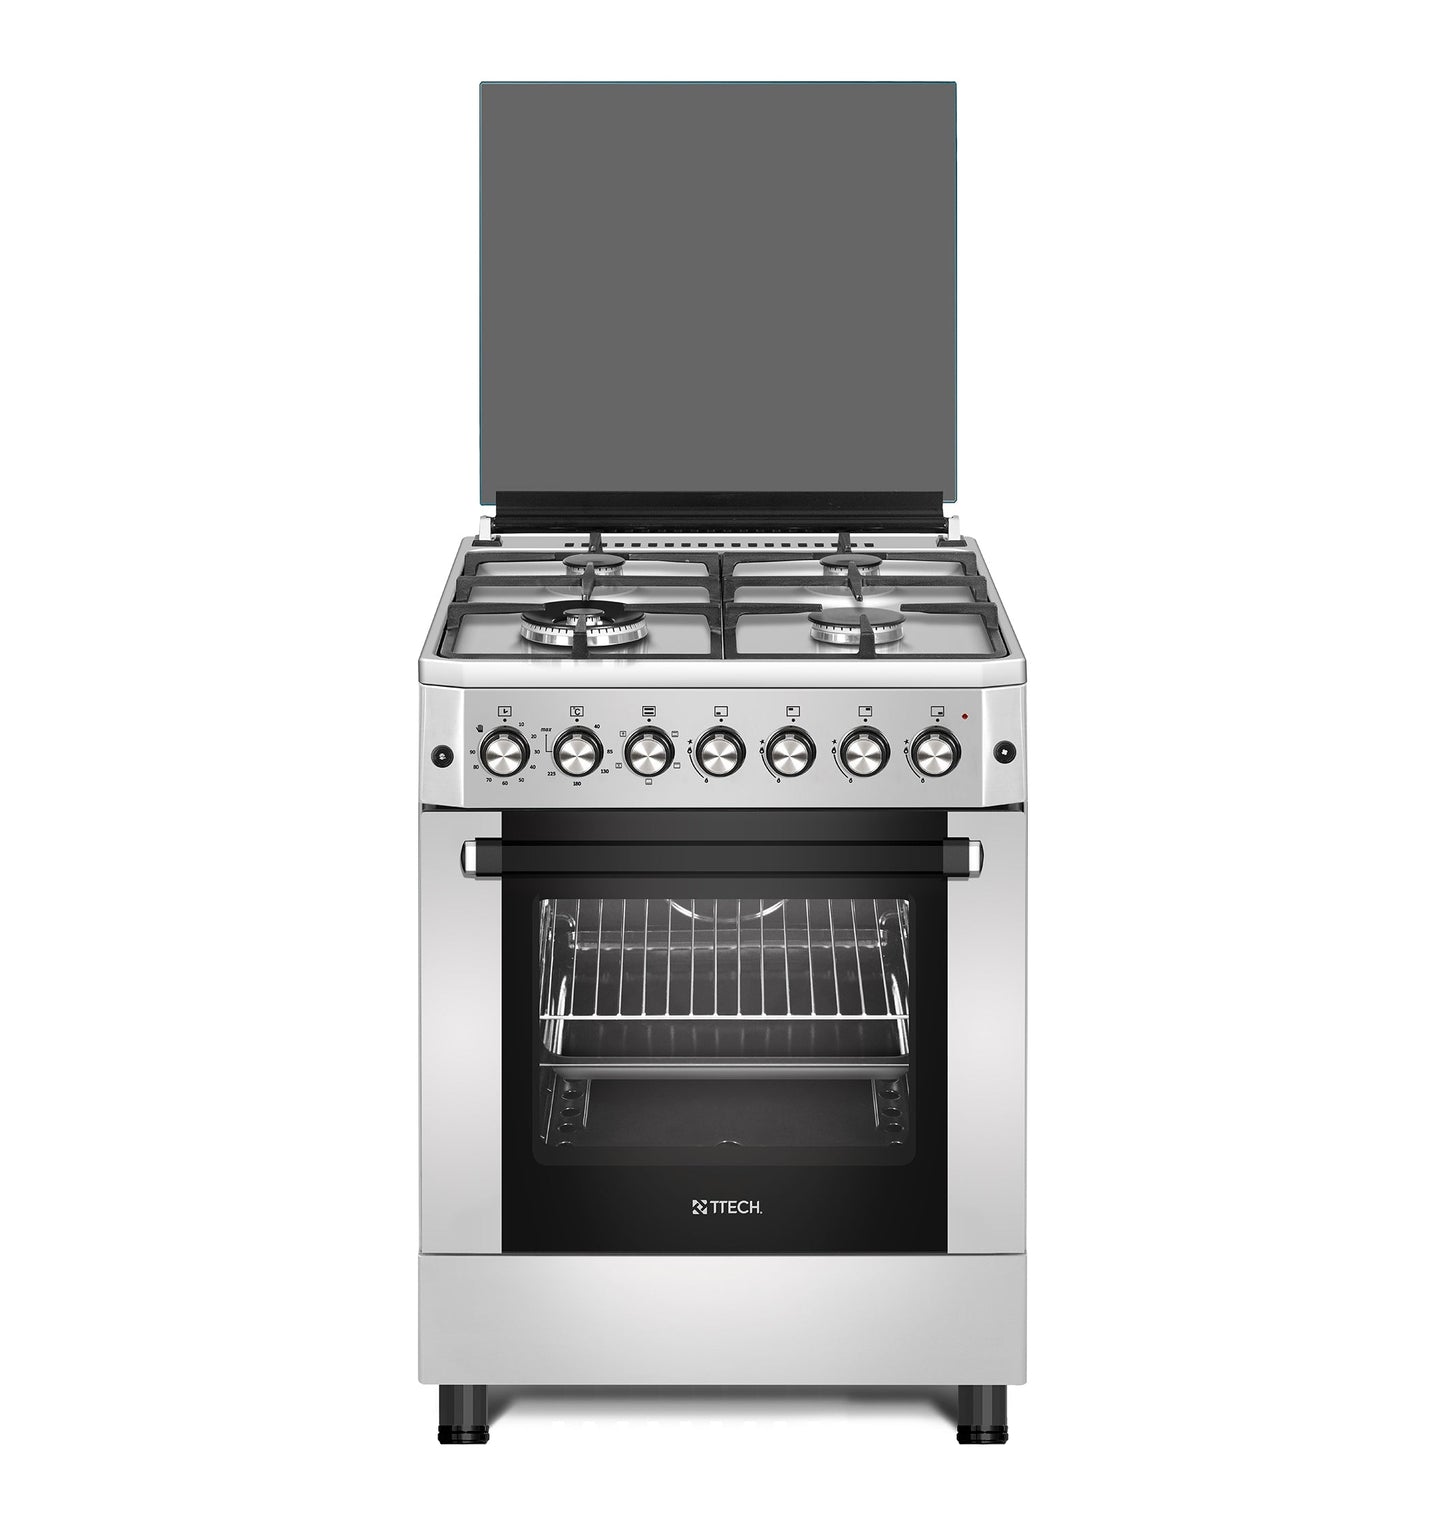 T-TECH IDEAL PLUS SERIES 60X60 FULL GAS FREE STANDING COOKER, 4 GAS EURO POOL TYPE BURNERS, GAS OVEN & GAS GRILL, MECHANICAL TIMER, STAINLESS STEEL - F6IP40GF HIX